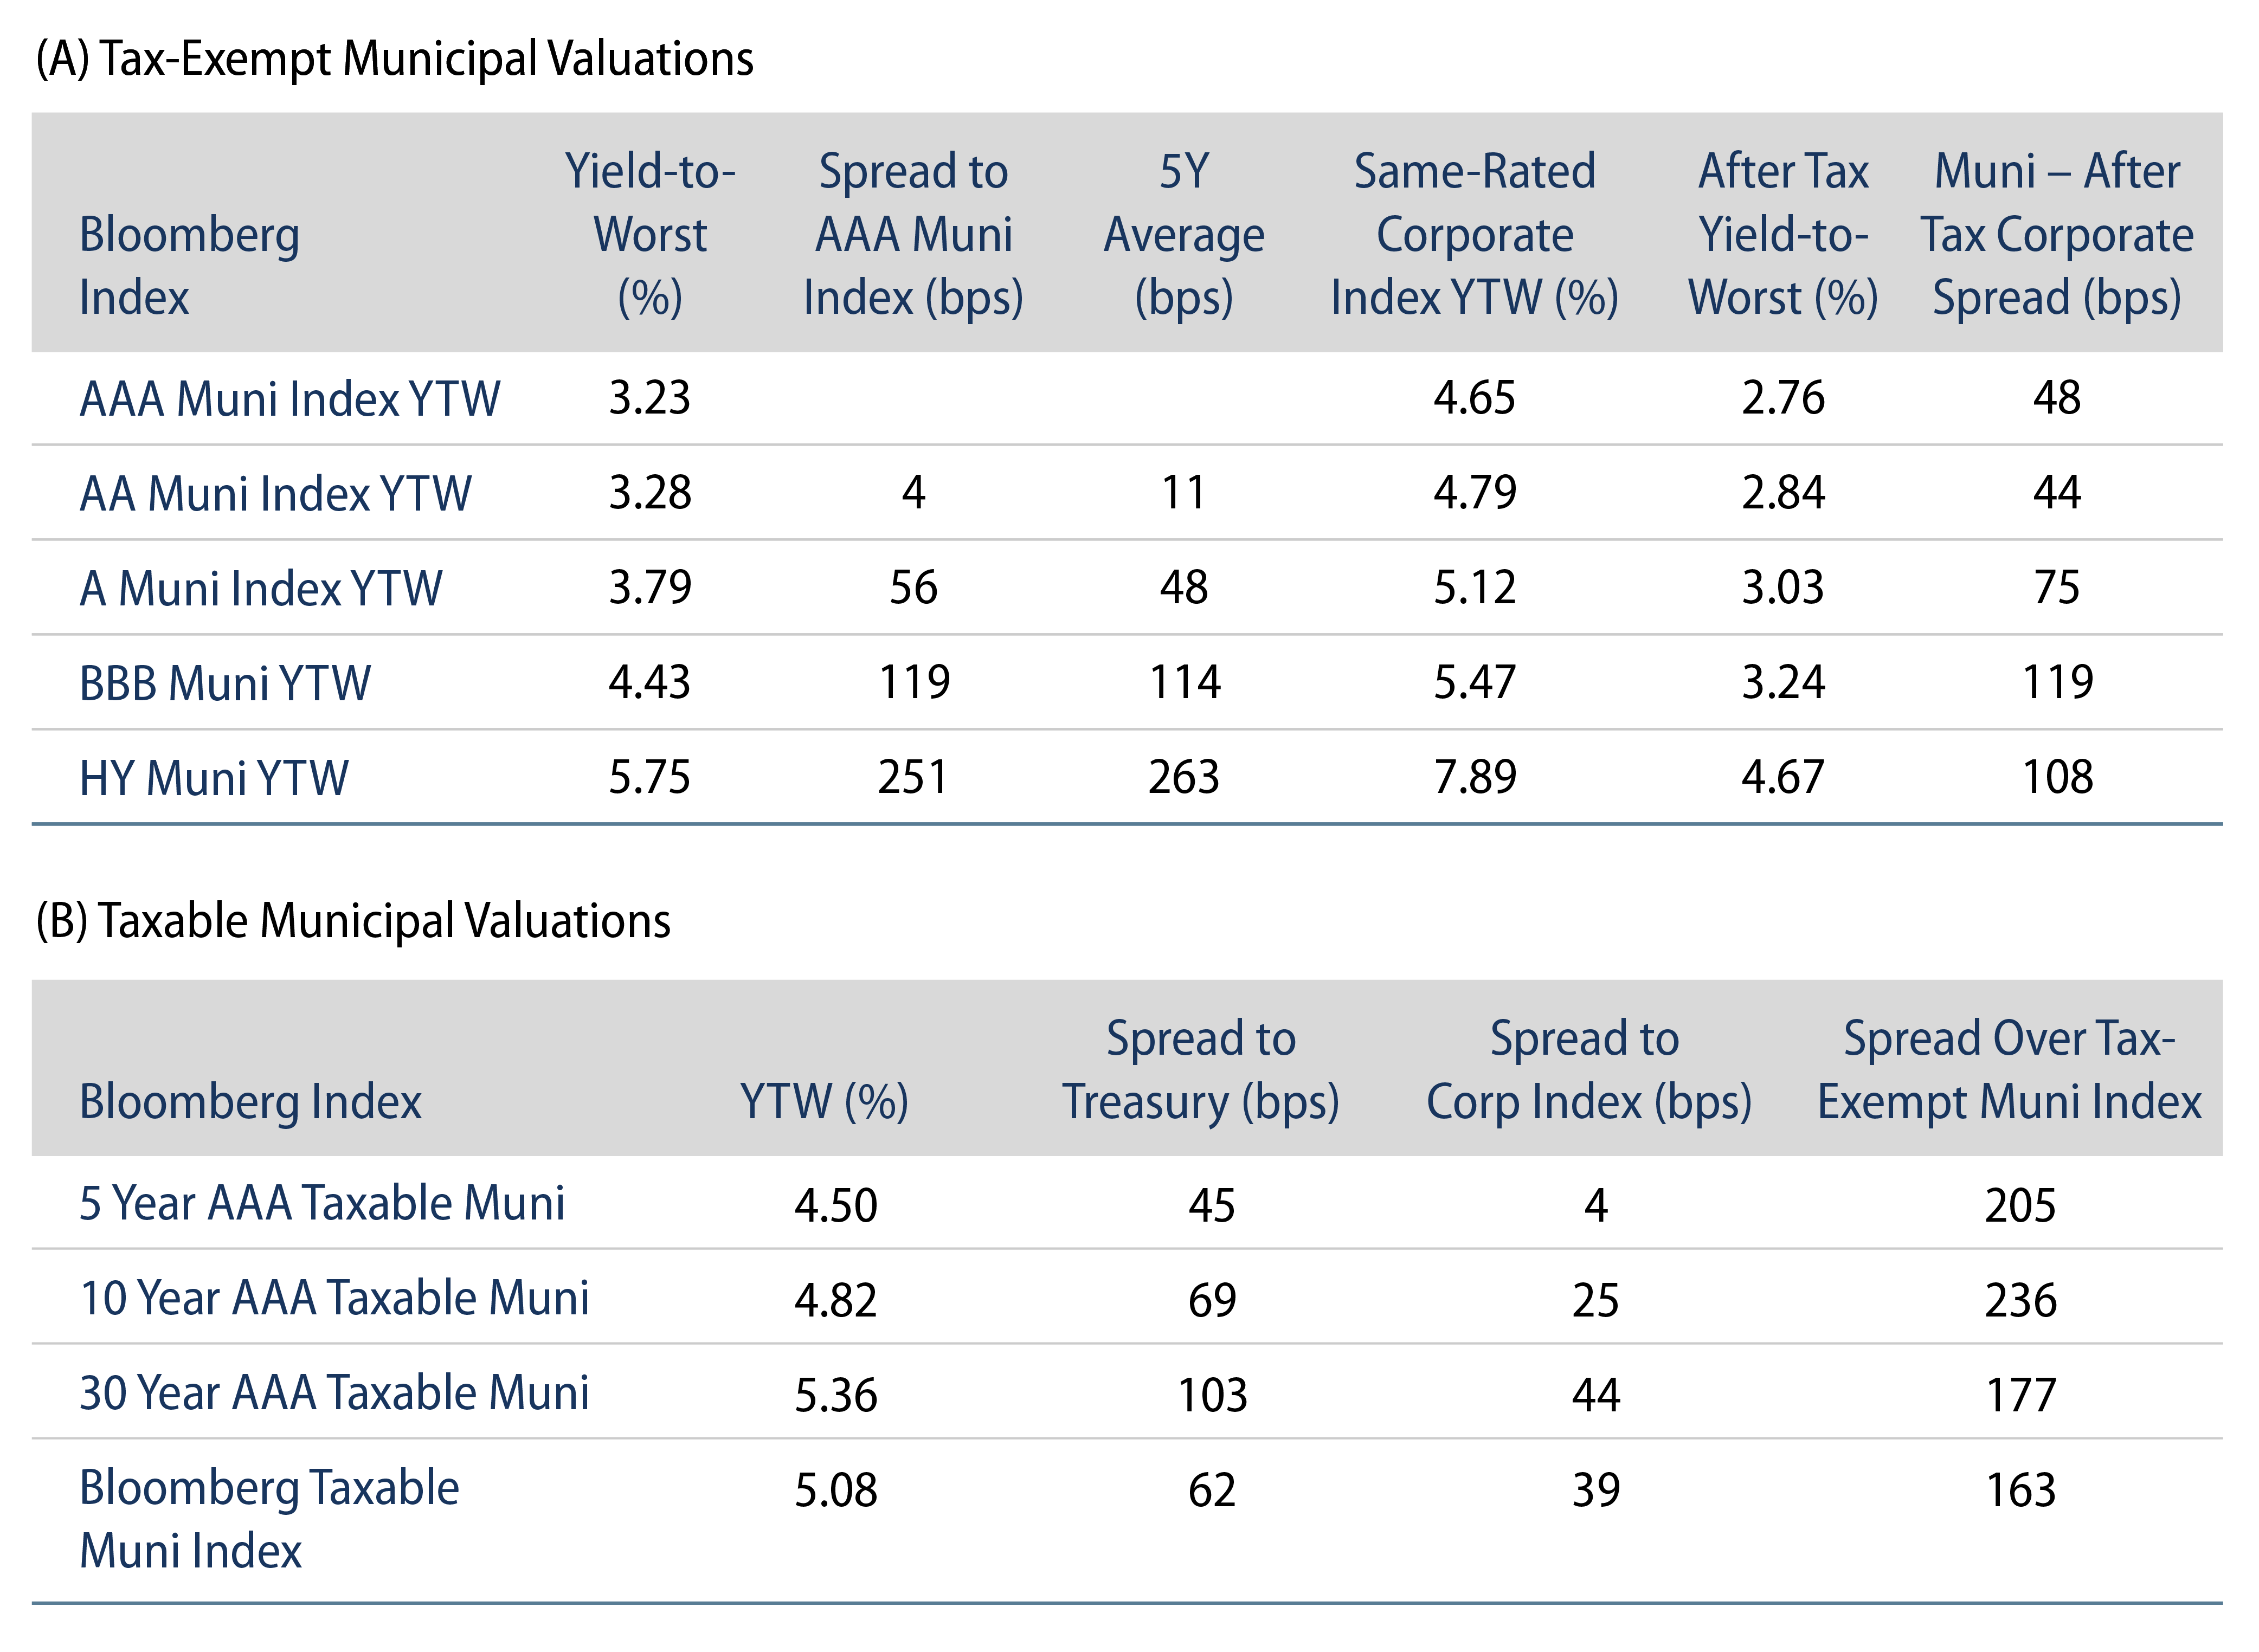 Tax-Exempt and Taxable Muni Valuations